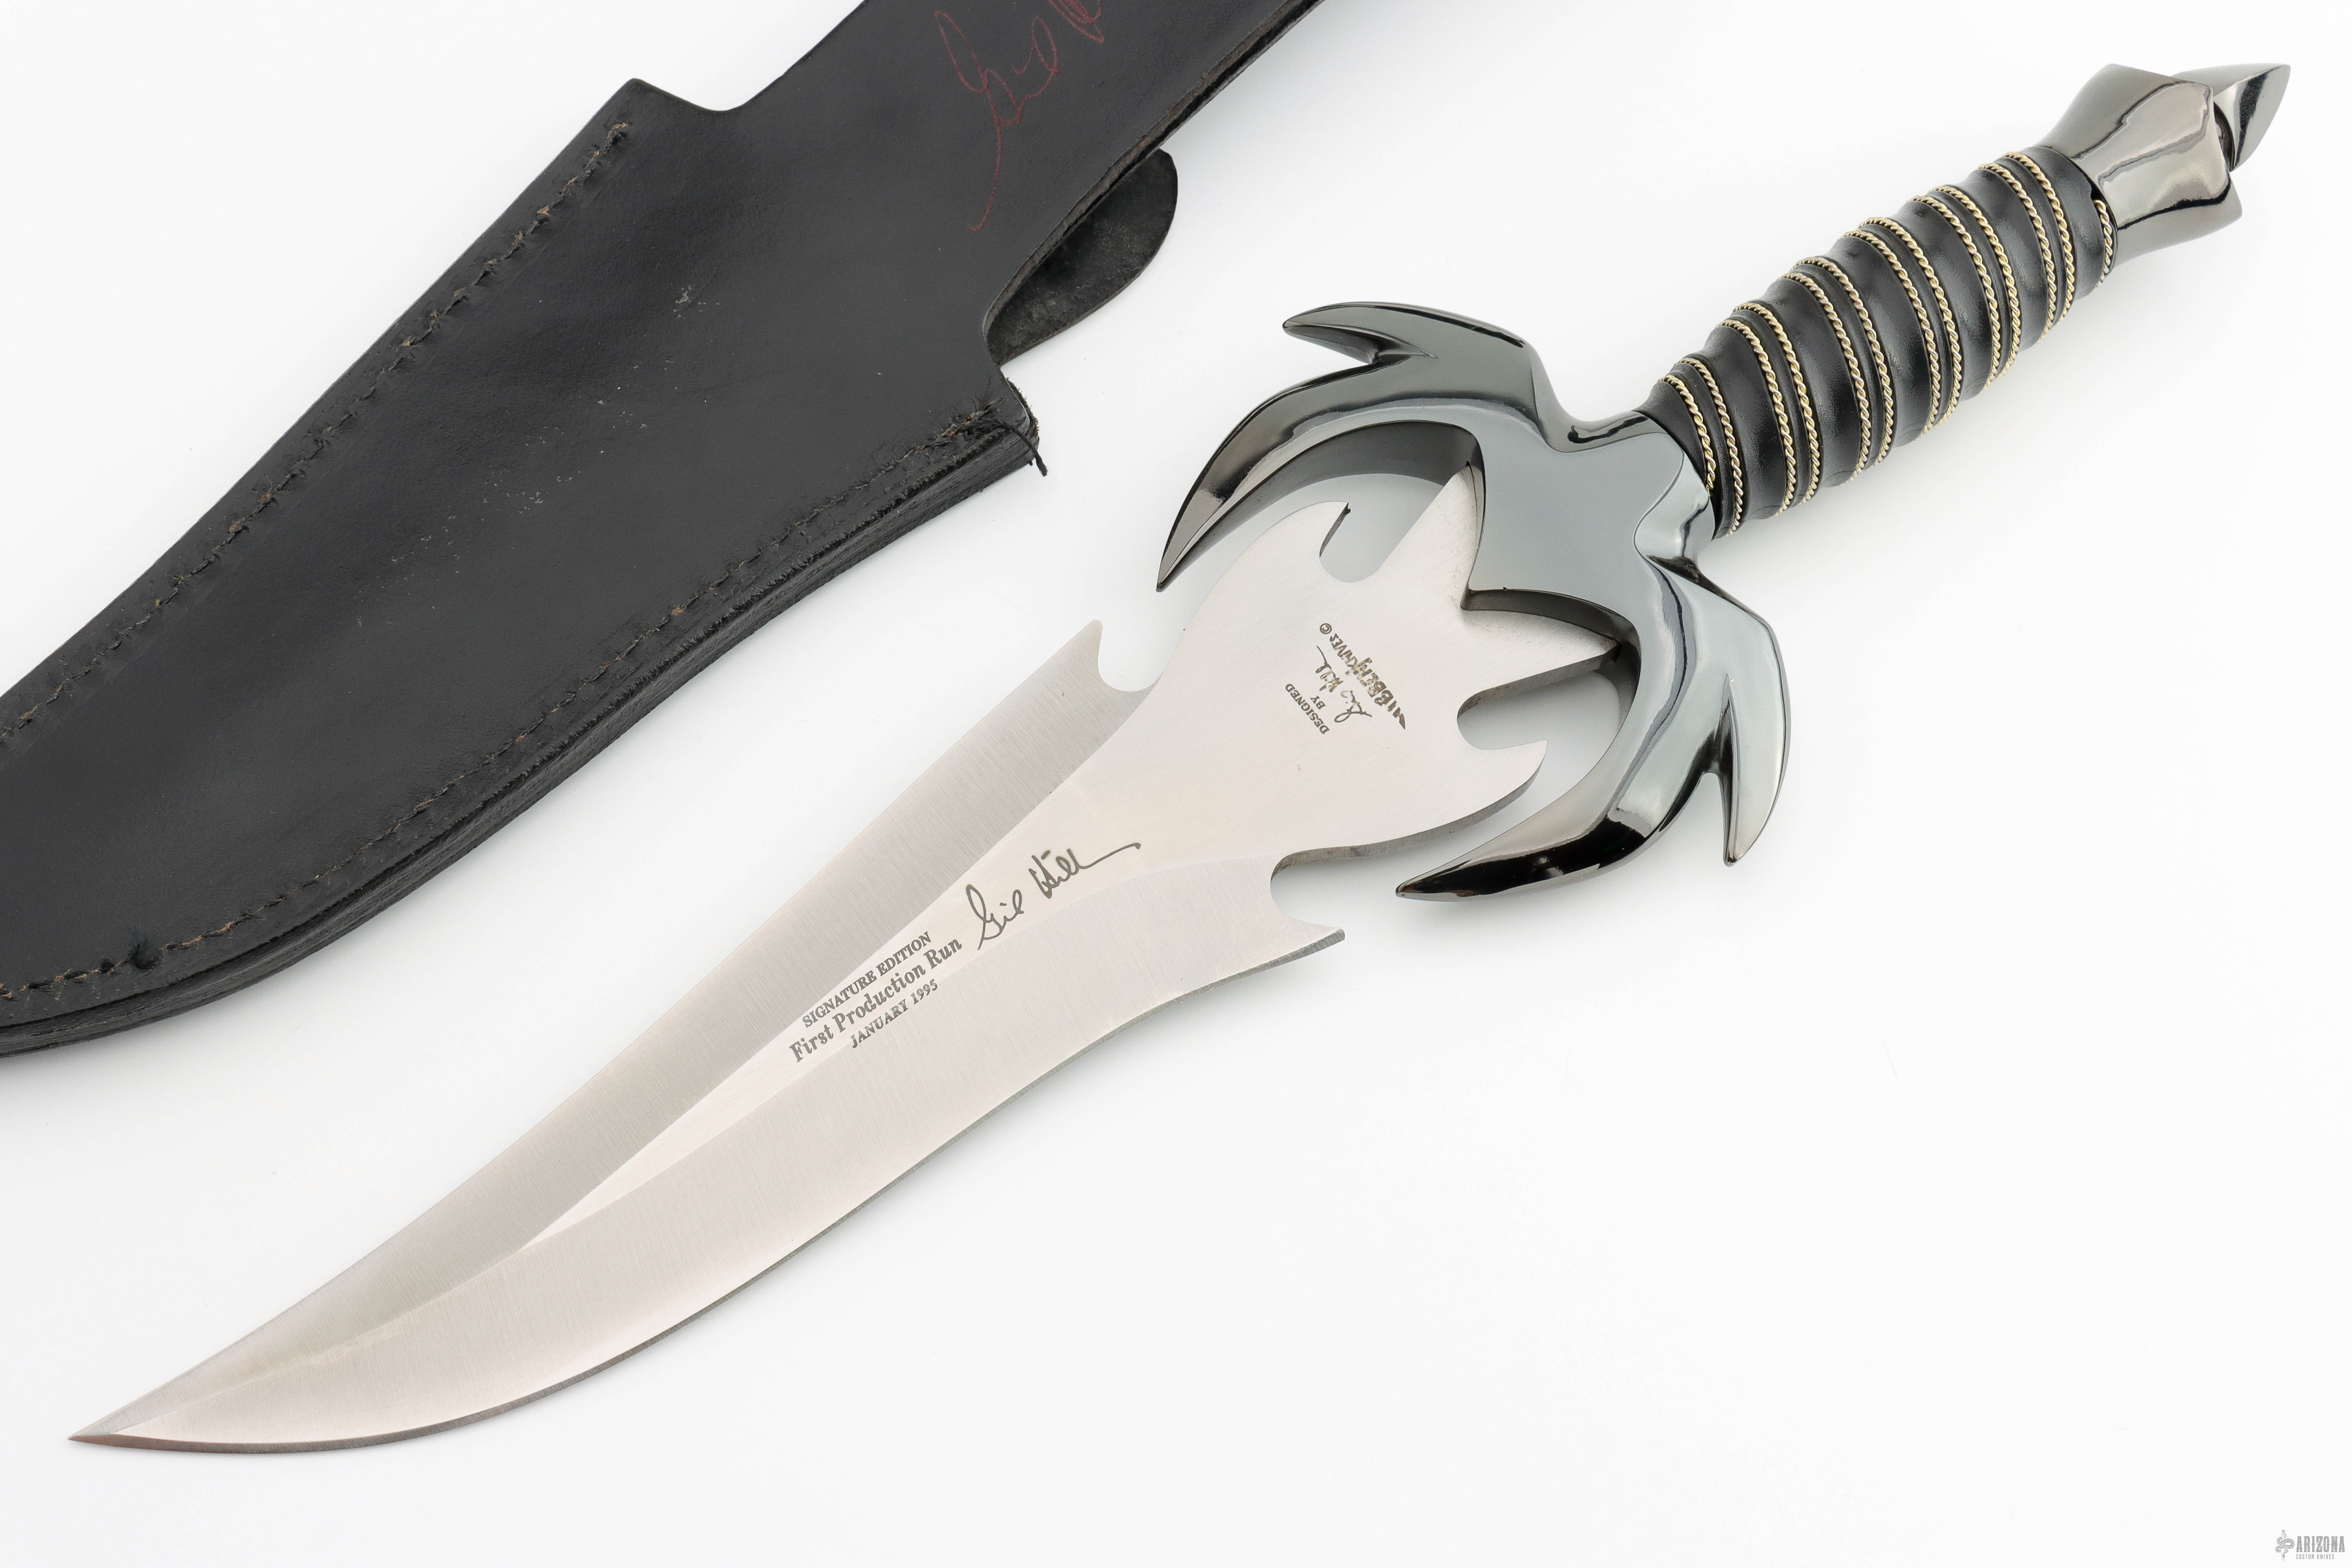 A Complete Beginners Guide to Knife Sharpening – The Bowie Knife